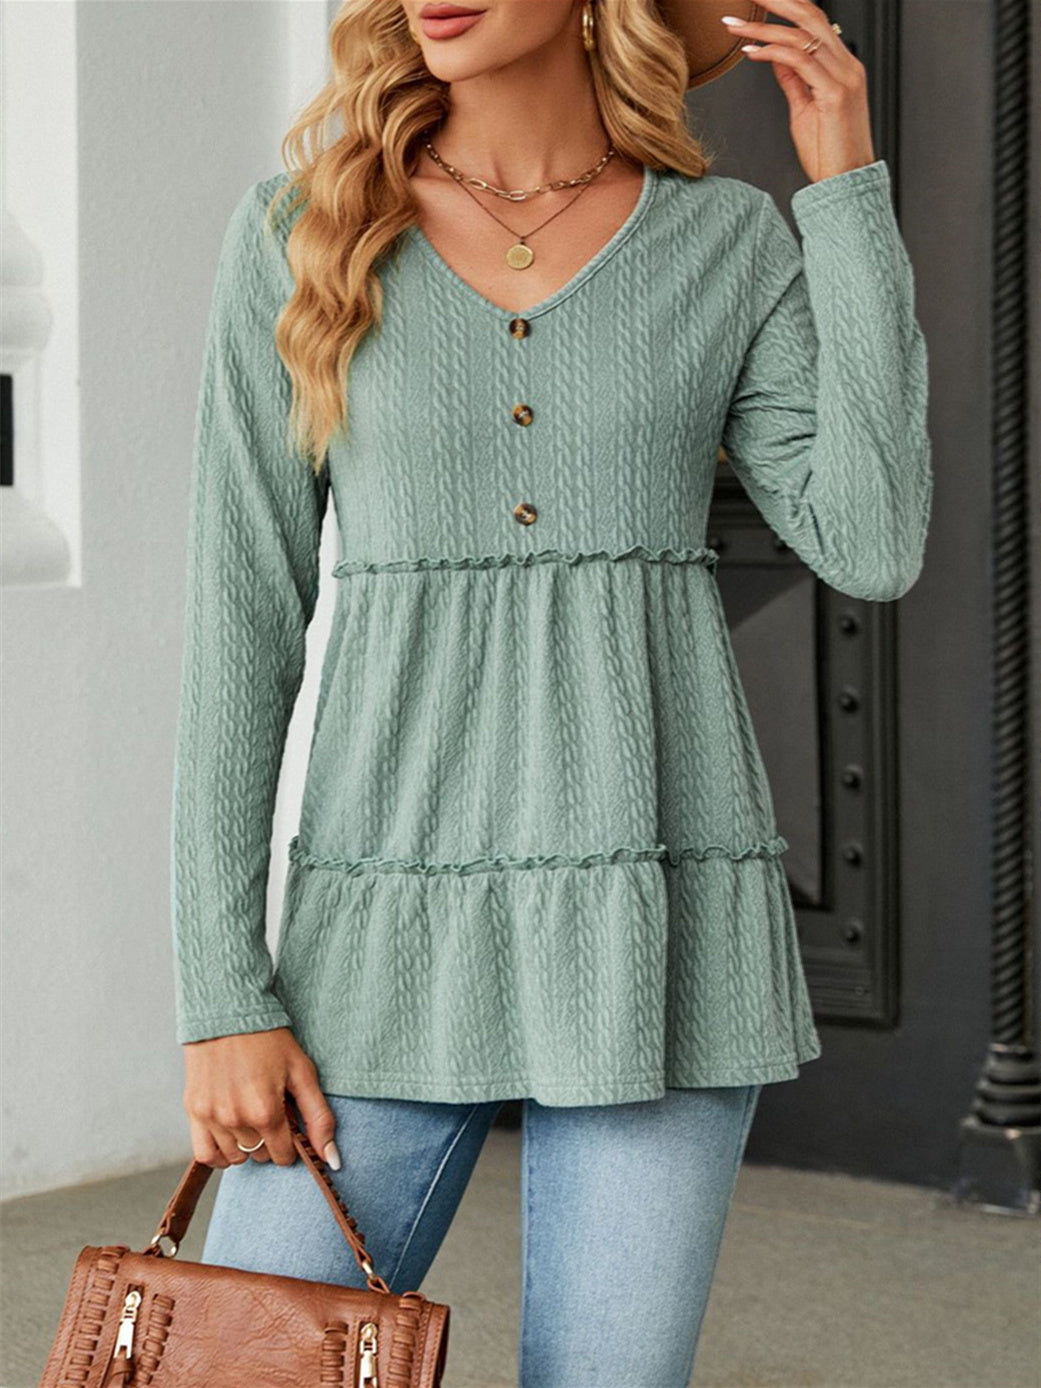 Women's Button Stitching Solid Color V-Neck Long Sleeve Top